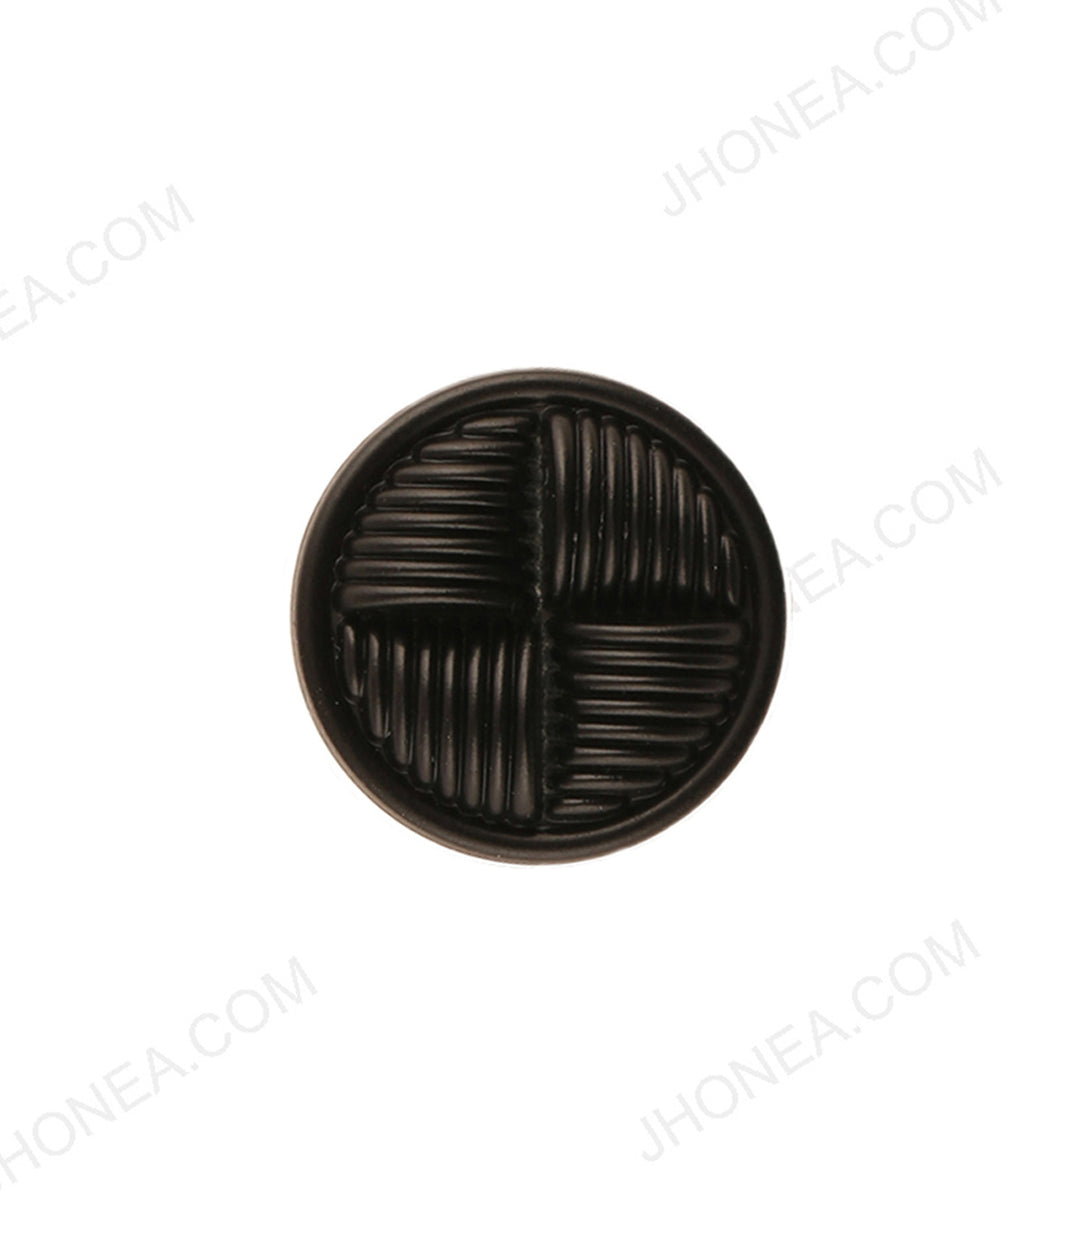 Round Shape Dome Surface Coat Buttons